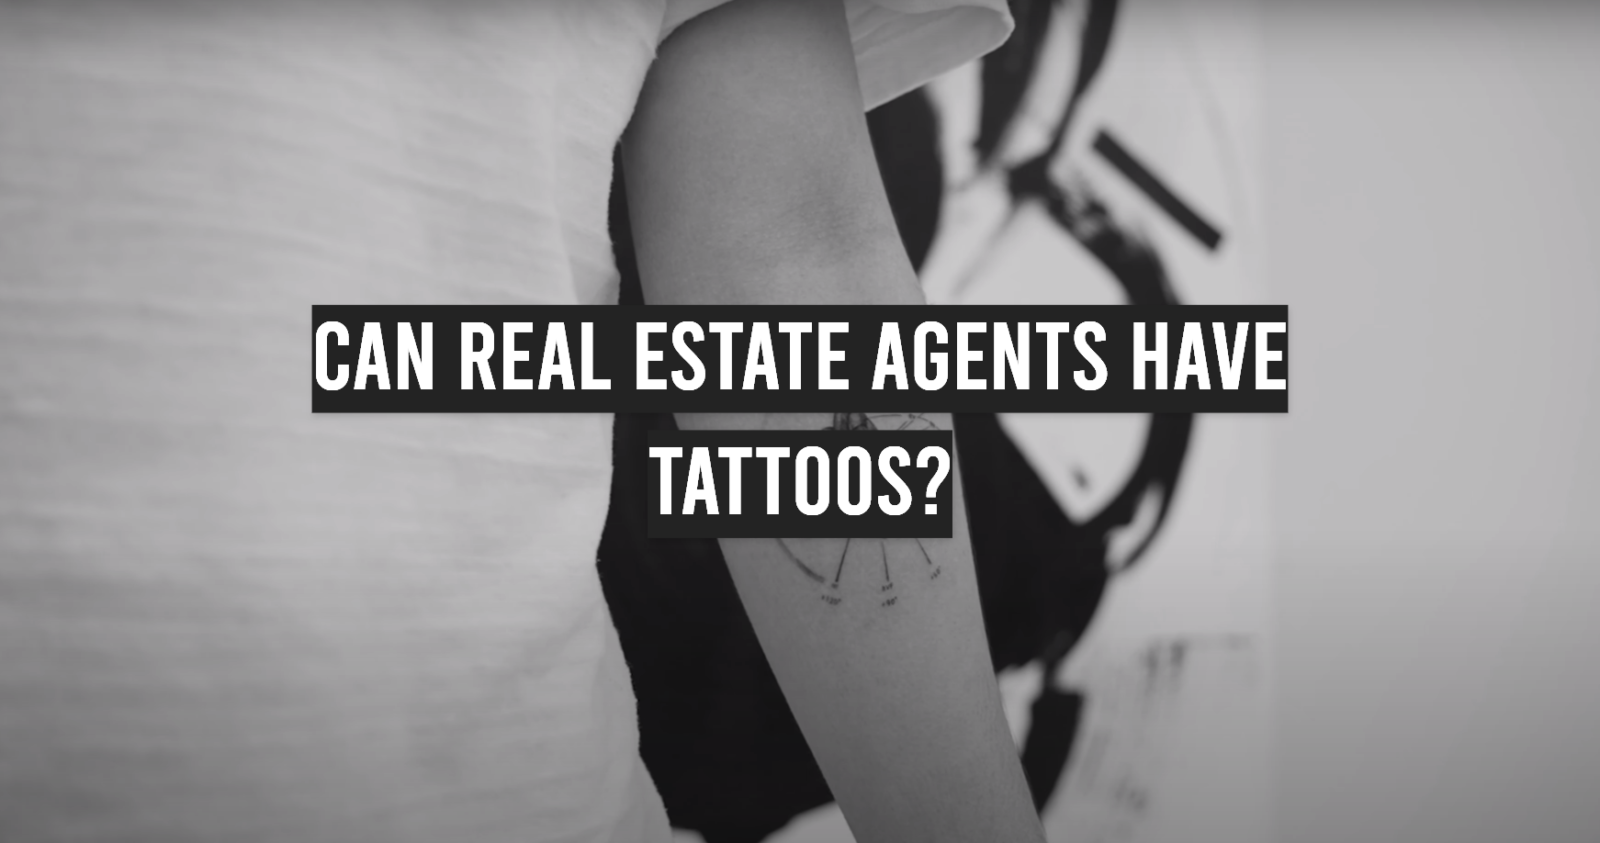 Can Real Estate Agents Have Tattoos?